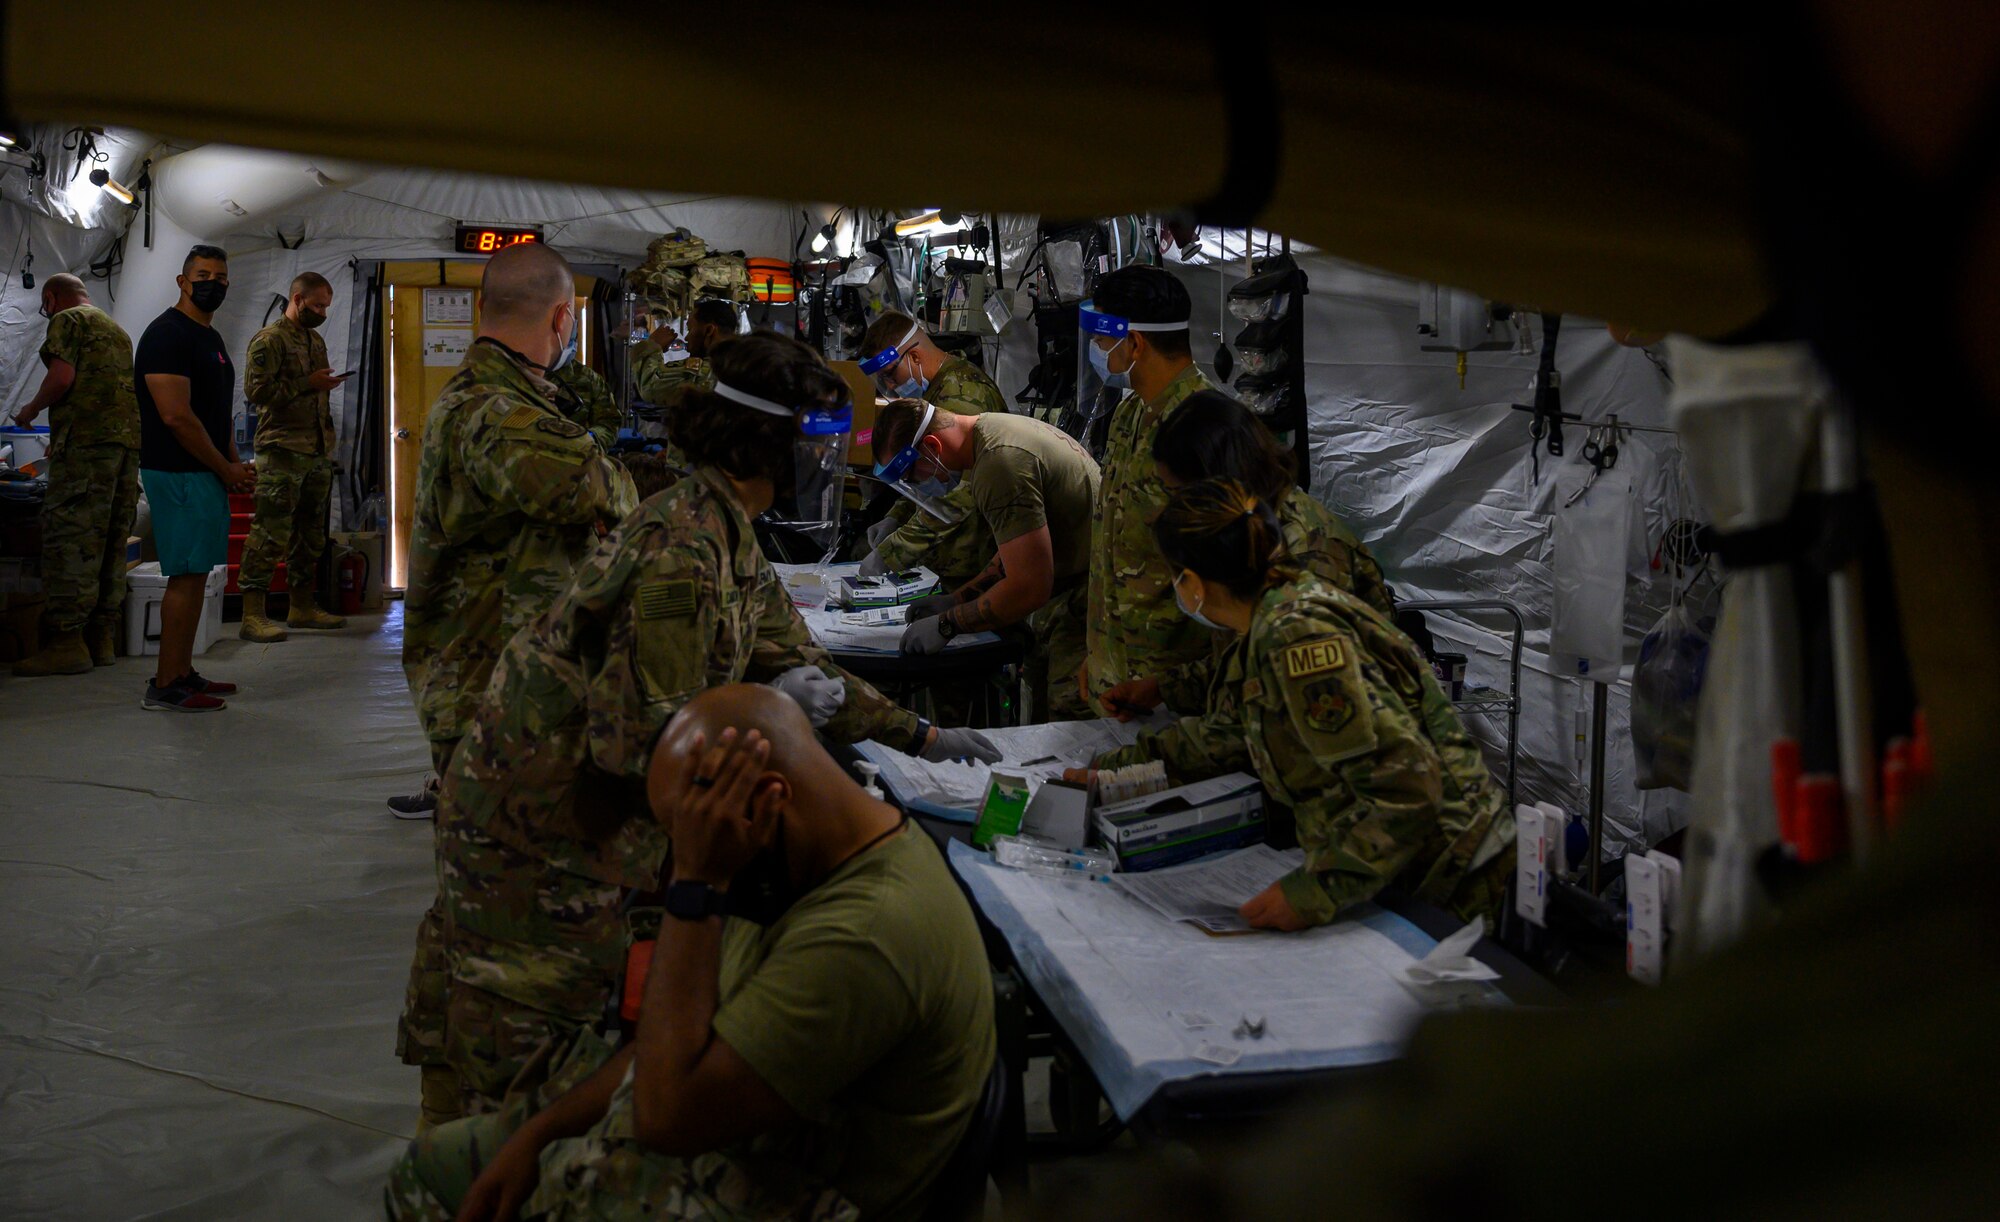 Medical personnel from the 378th Expeditionary Medical Squadron hosted a COVID-19 vaccine distribution event for joint forces at Prince Sultan Air Base, Kingdom of Saudi Arabia, May 4, 2021. The event was part of ongoing efforts to distribute more than 900 Janssen (Johnson & Johnson) COVID-19 vaccine doses, following the DoD Director of Health Affairs' direction for military treatment facilities to resume administration of the vaccine. DoD personnel are highly encouraged to take the vaccine to protect their health, their families, their community, and lower the public health risks associated with the COVID-19 pandemic. (U.S. Air Force photo by Senior Airman Samuel Earick)